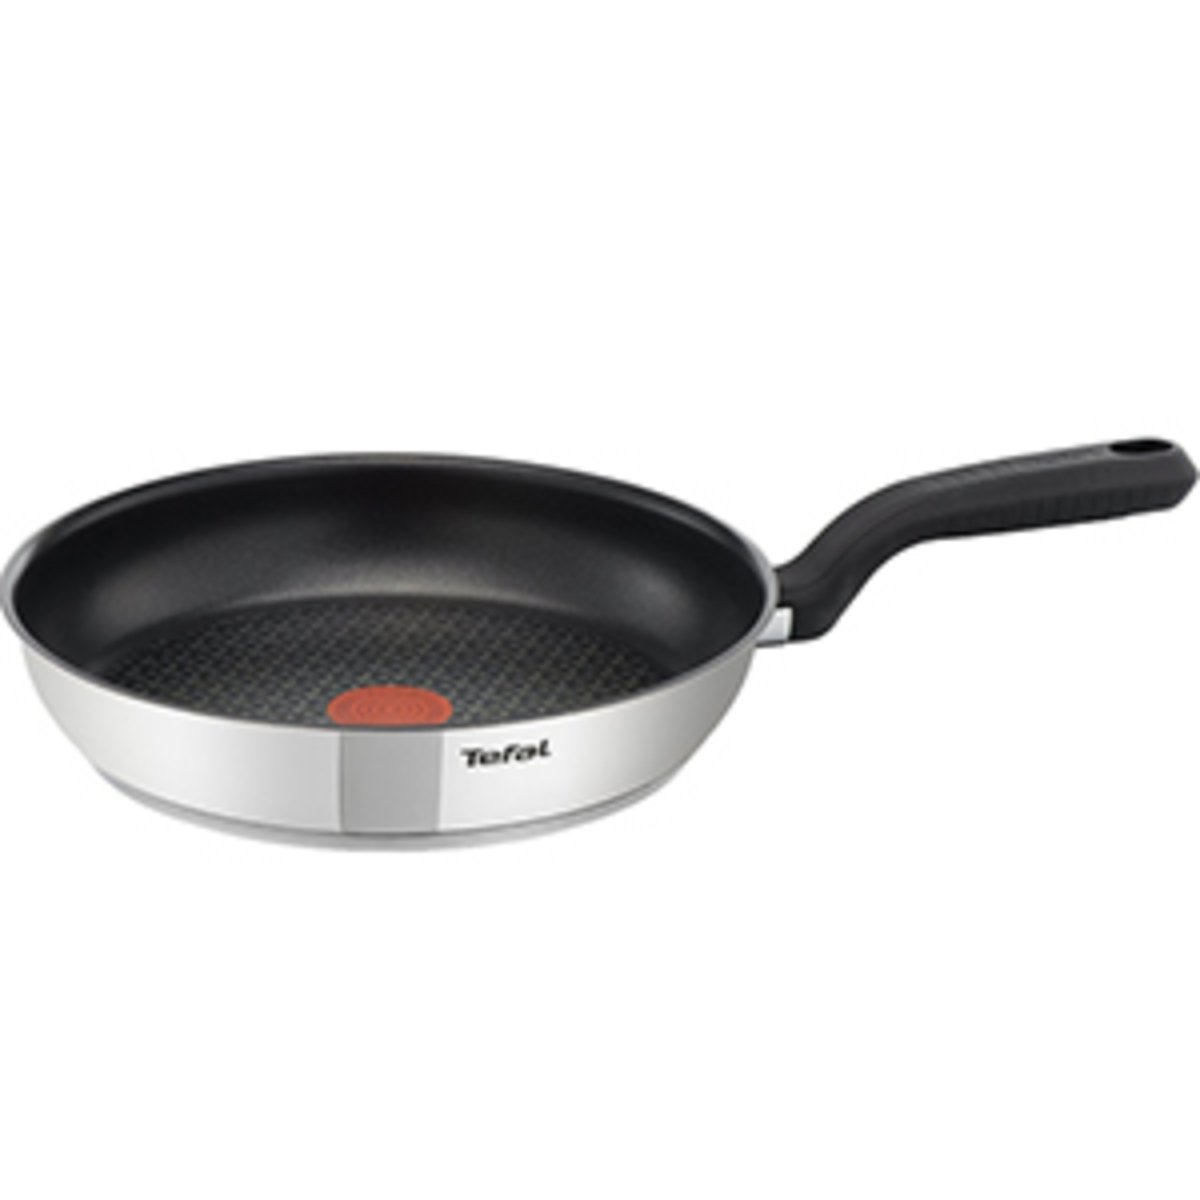 Tefal Intuition Stainless Steel Fry Pan, 28 cm, 7030614